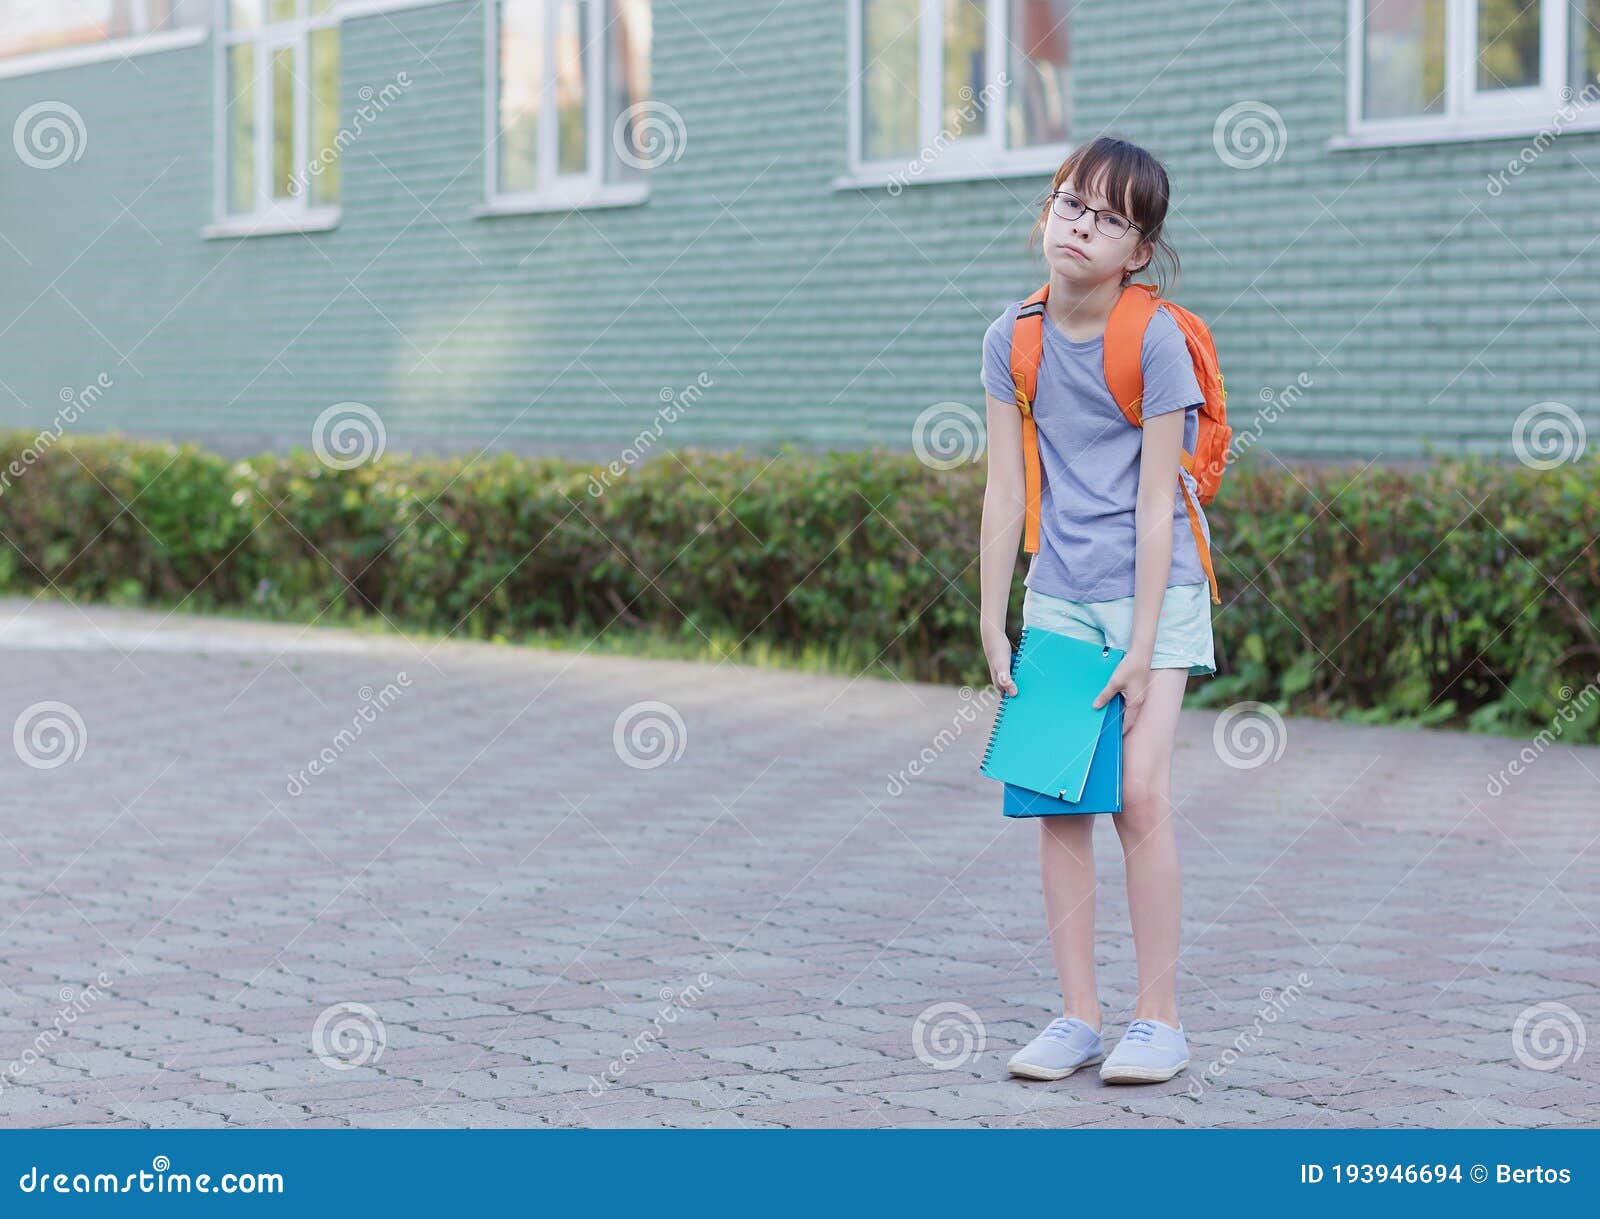 schoolgirl backs to school. portrait of tired child with backpack and notebook